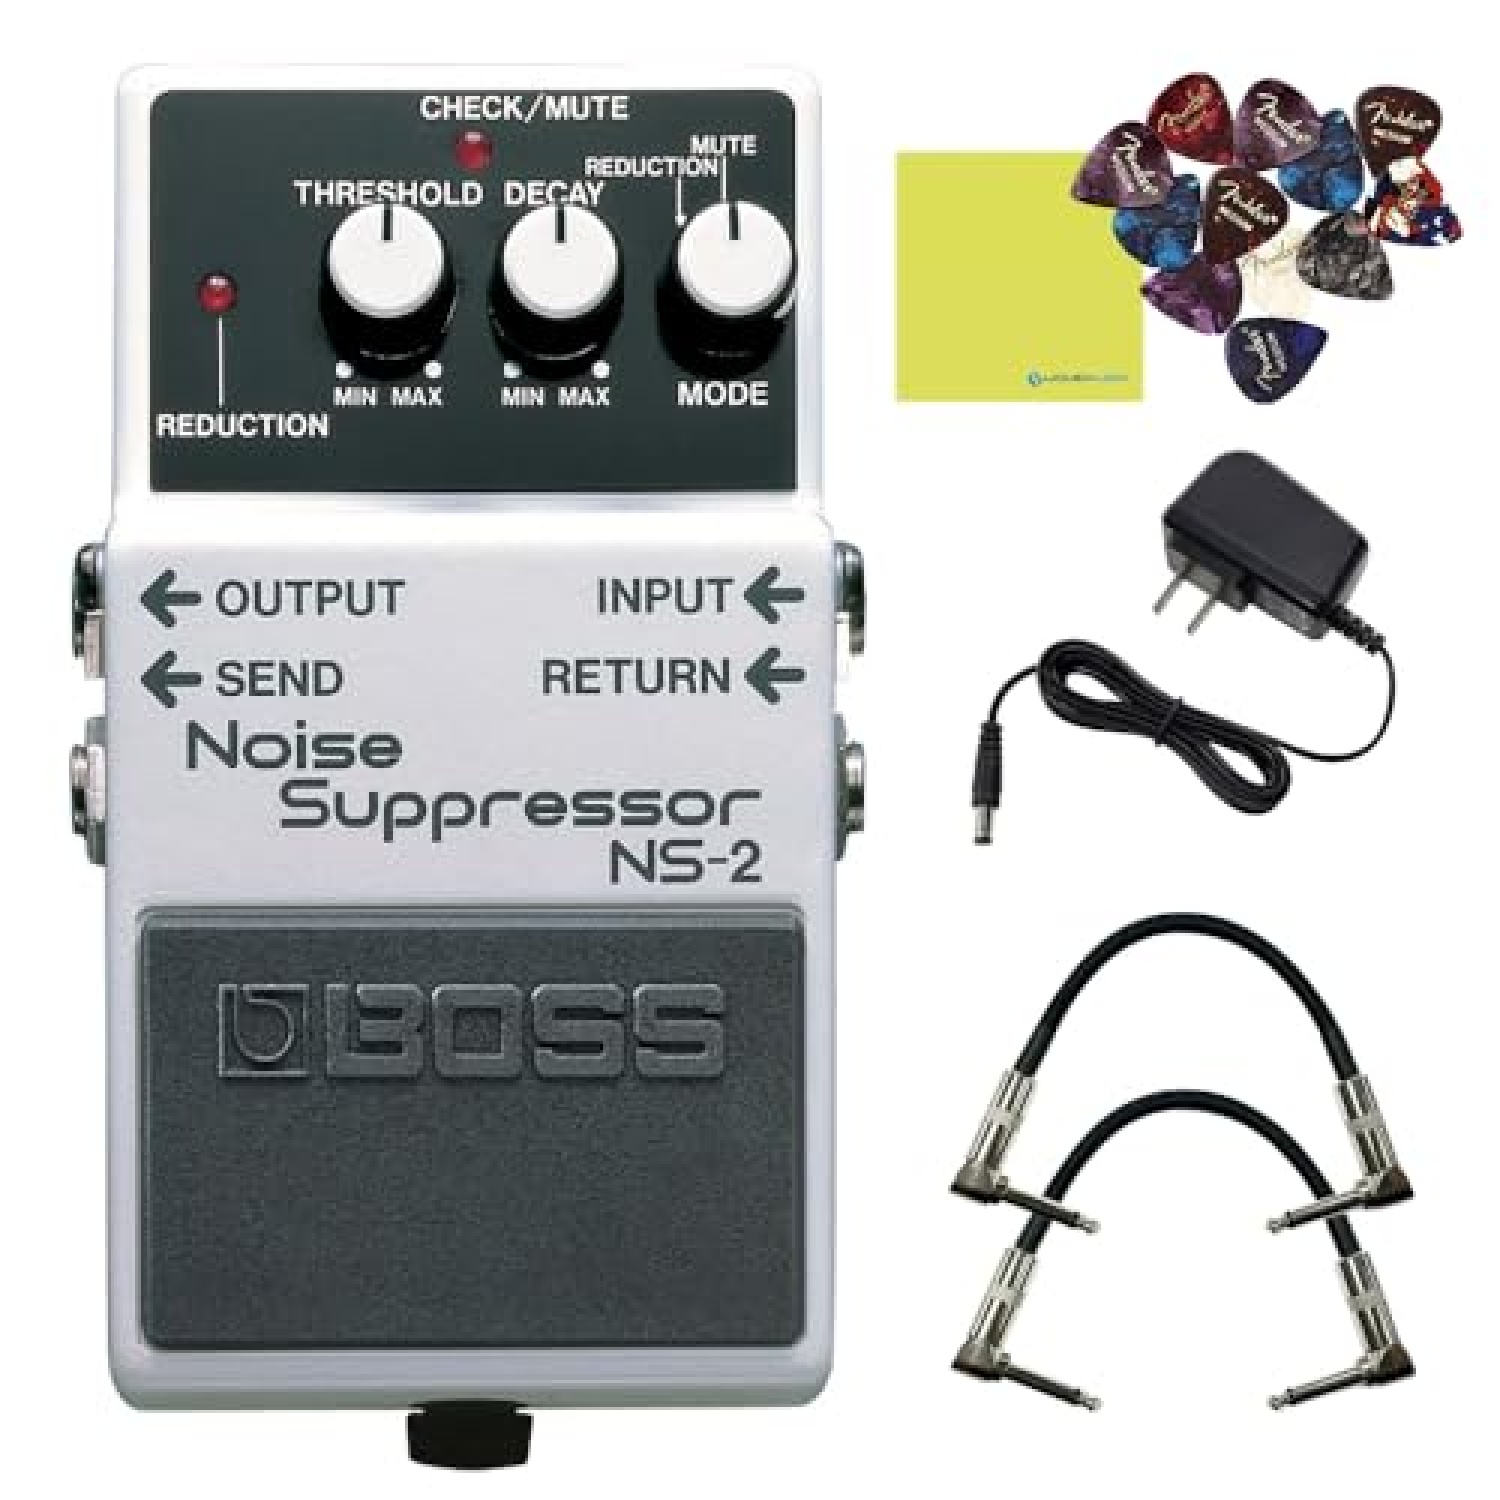 Boss NS-2 Noise Suppressor Pedal Bundle w/2x Strukture S6P48 Woven Right Angle Patch Cables, 12x Guitar Picks, 9V Power Adapter and Liquid Audio Polishing Cloth